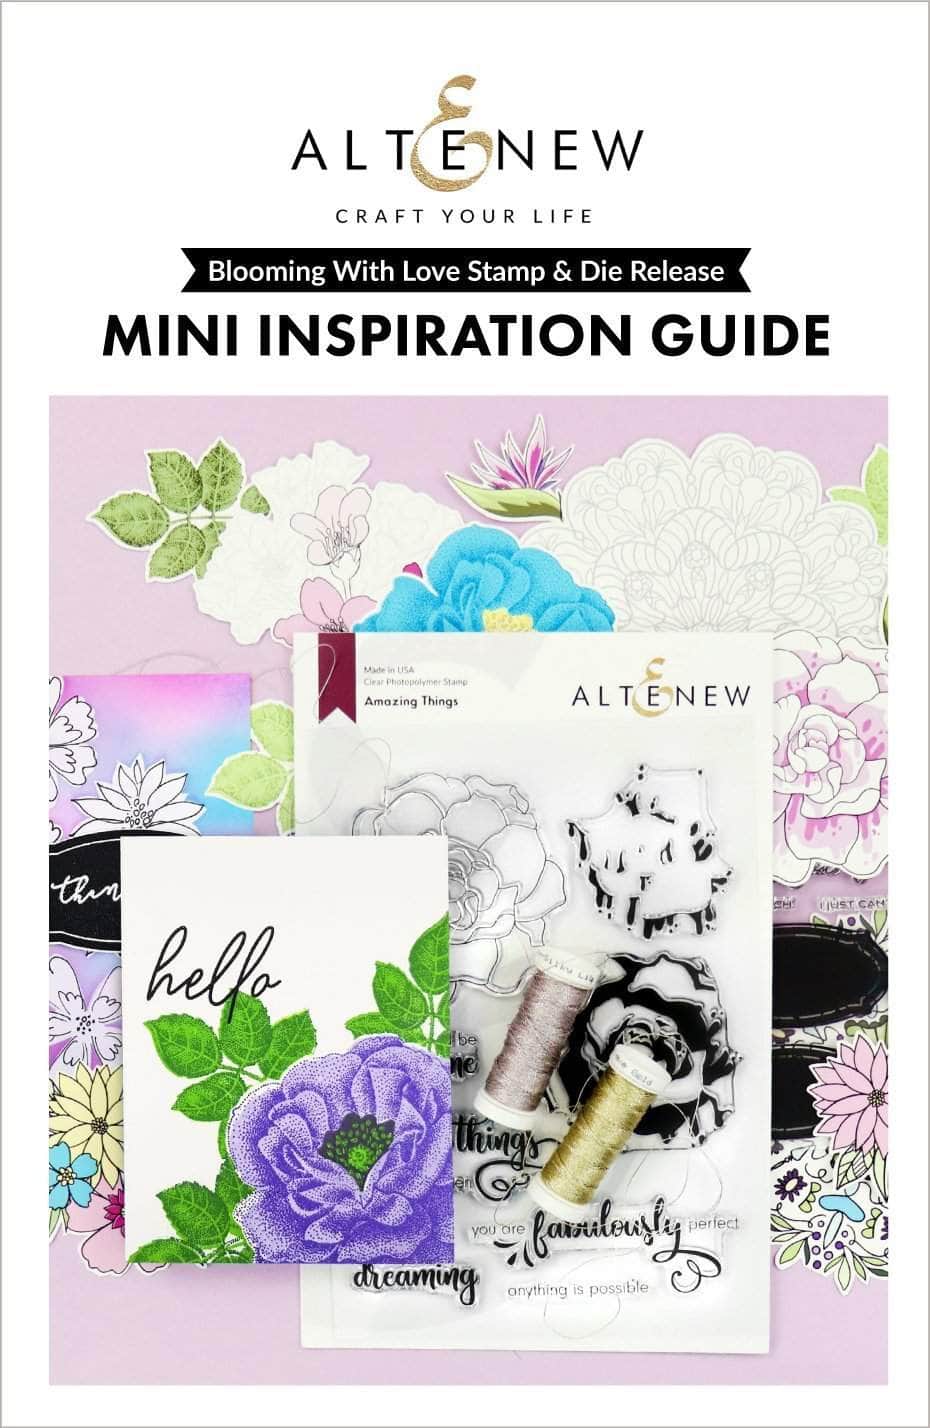 55Printing.com Printed Media Blooming With Love Stamp & Die Release Mini Inspiration Guide